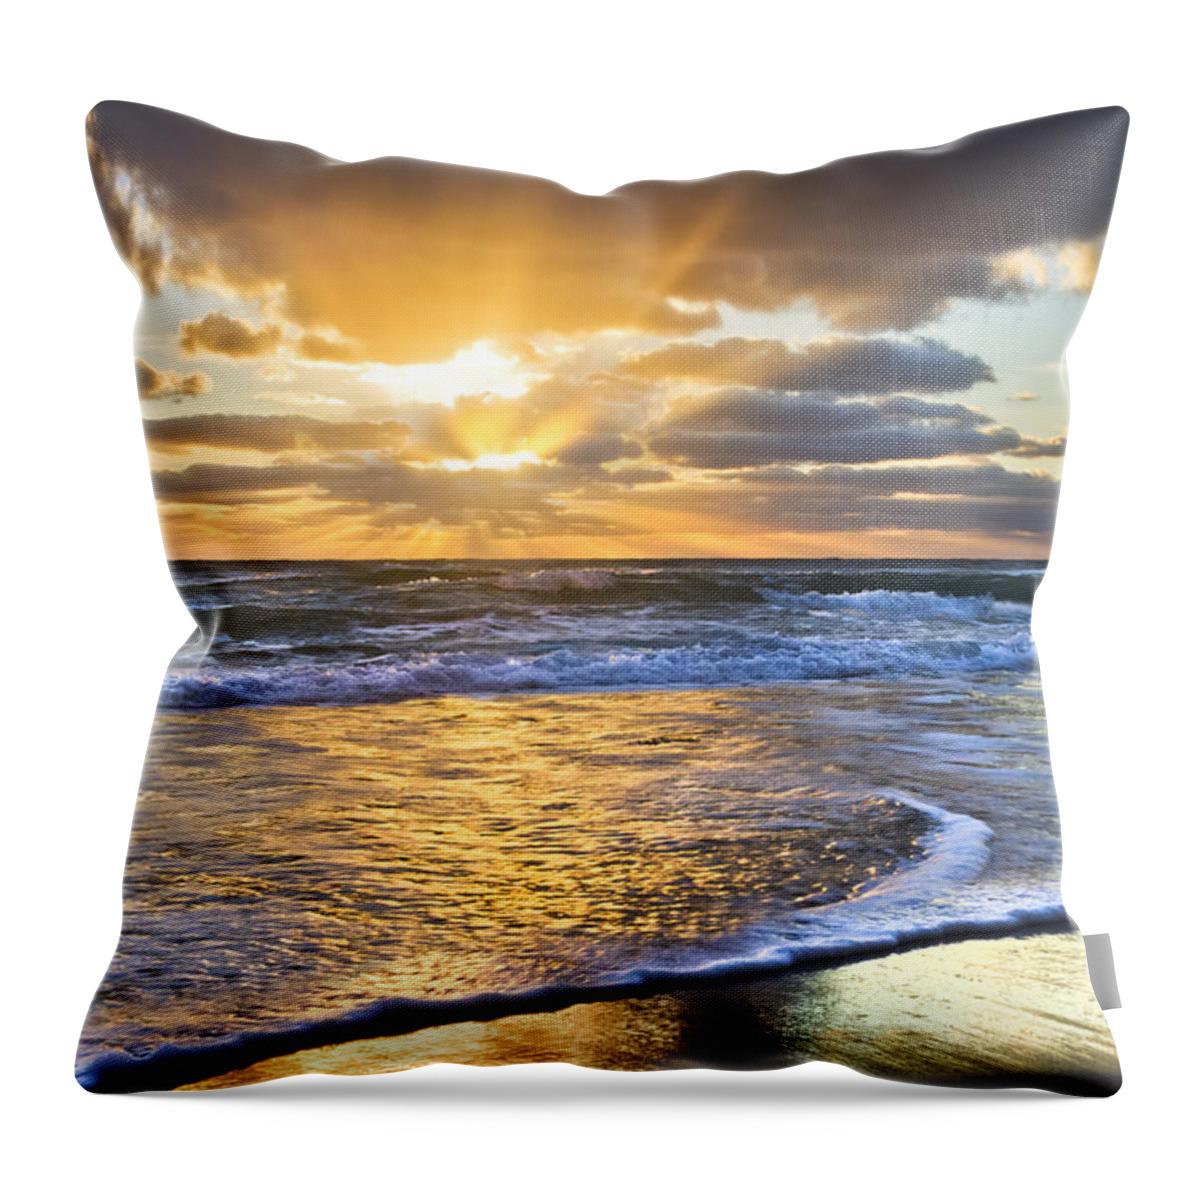 Clouds Throw Pillow featuring the photograph Heaven's Skylight by Debra and Dave Vanderlaan